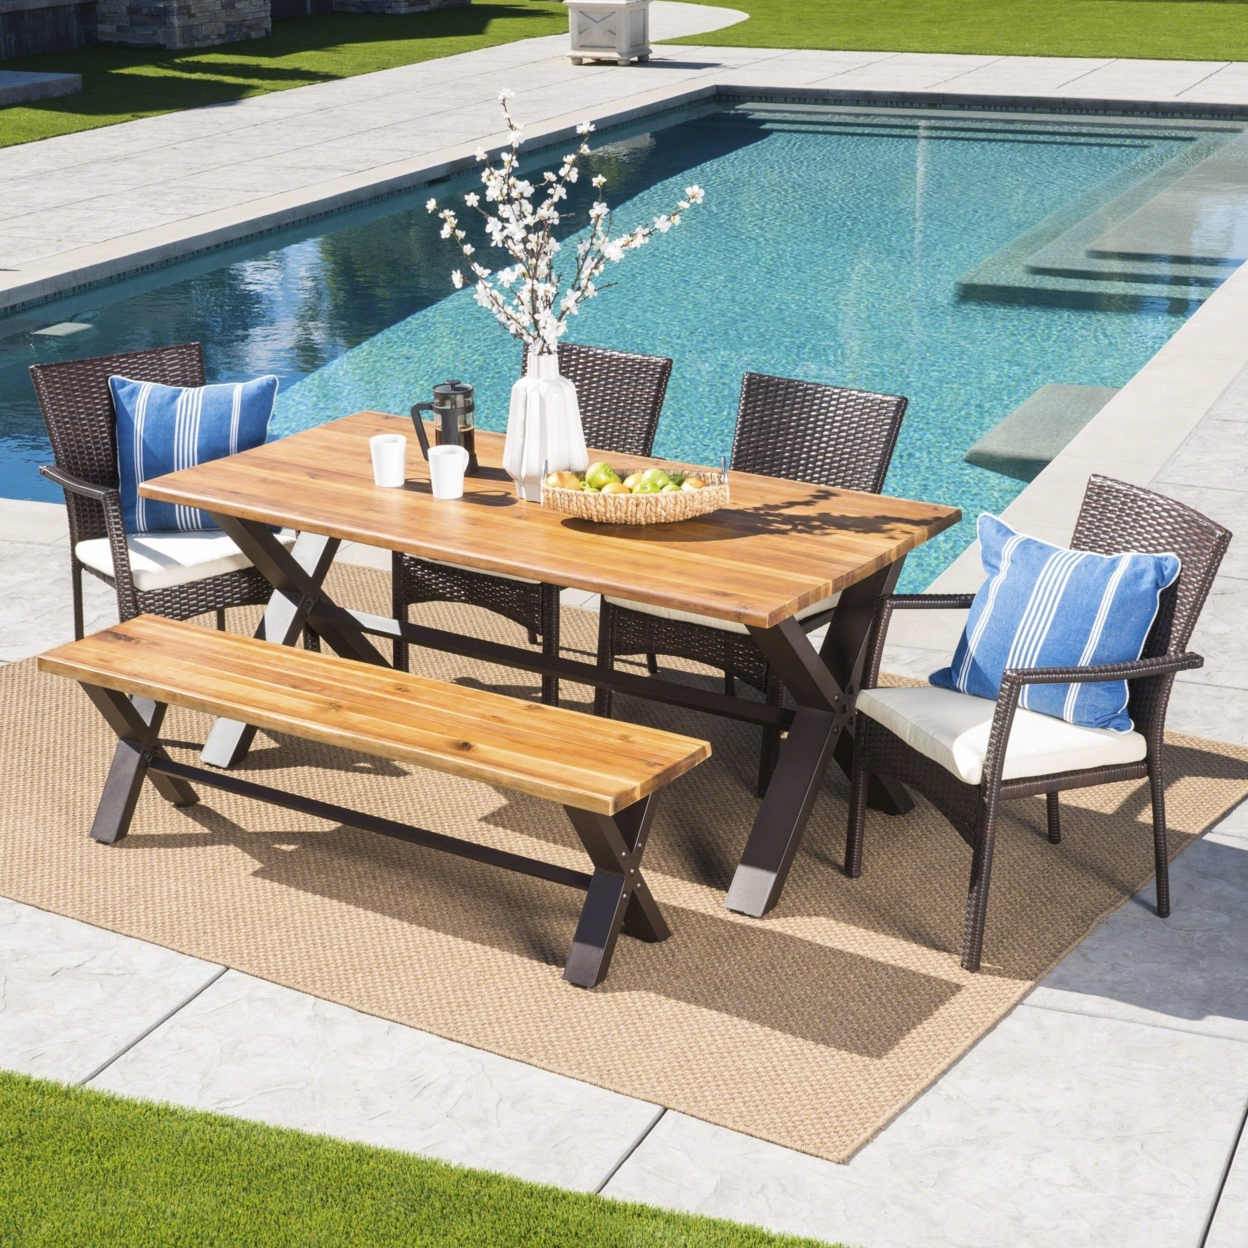 Brassel Outdoor 6 Piece Acacia Wood Dining Set With Wicker Dining Chairs